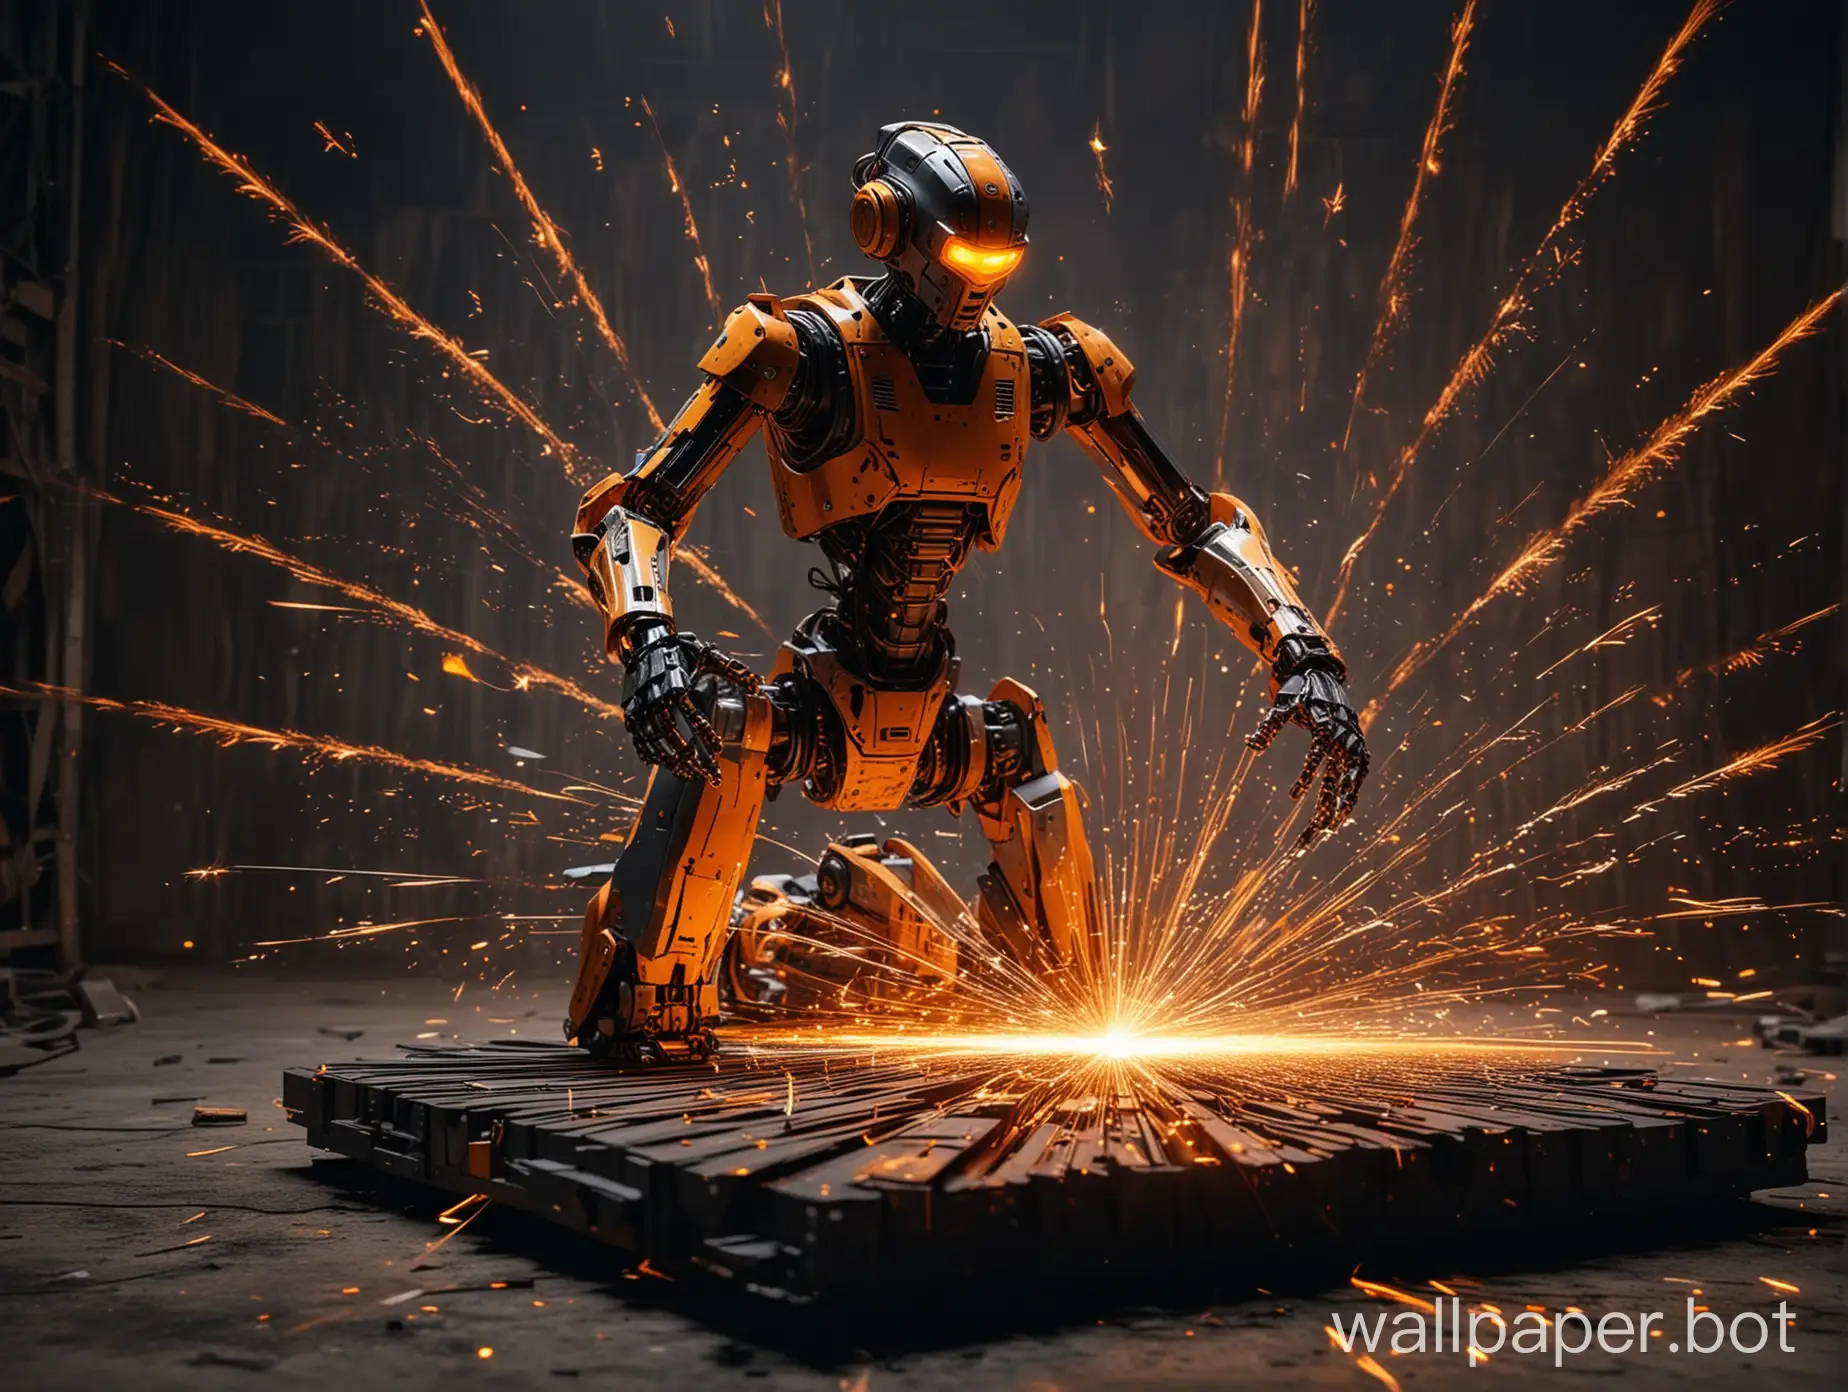 laser orange black style industrial with a robot ai in a epic pose cutting and bending metal sheets with a lot orange laser like fireworks